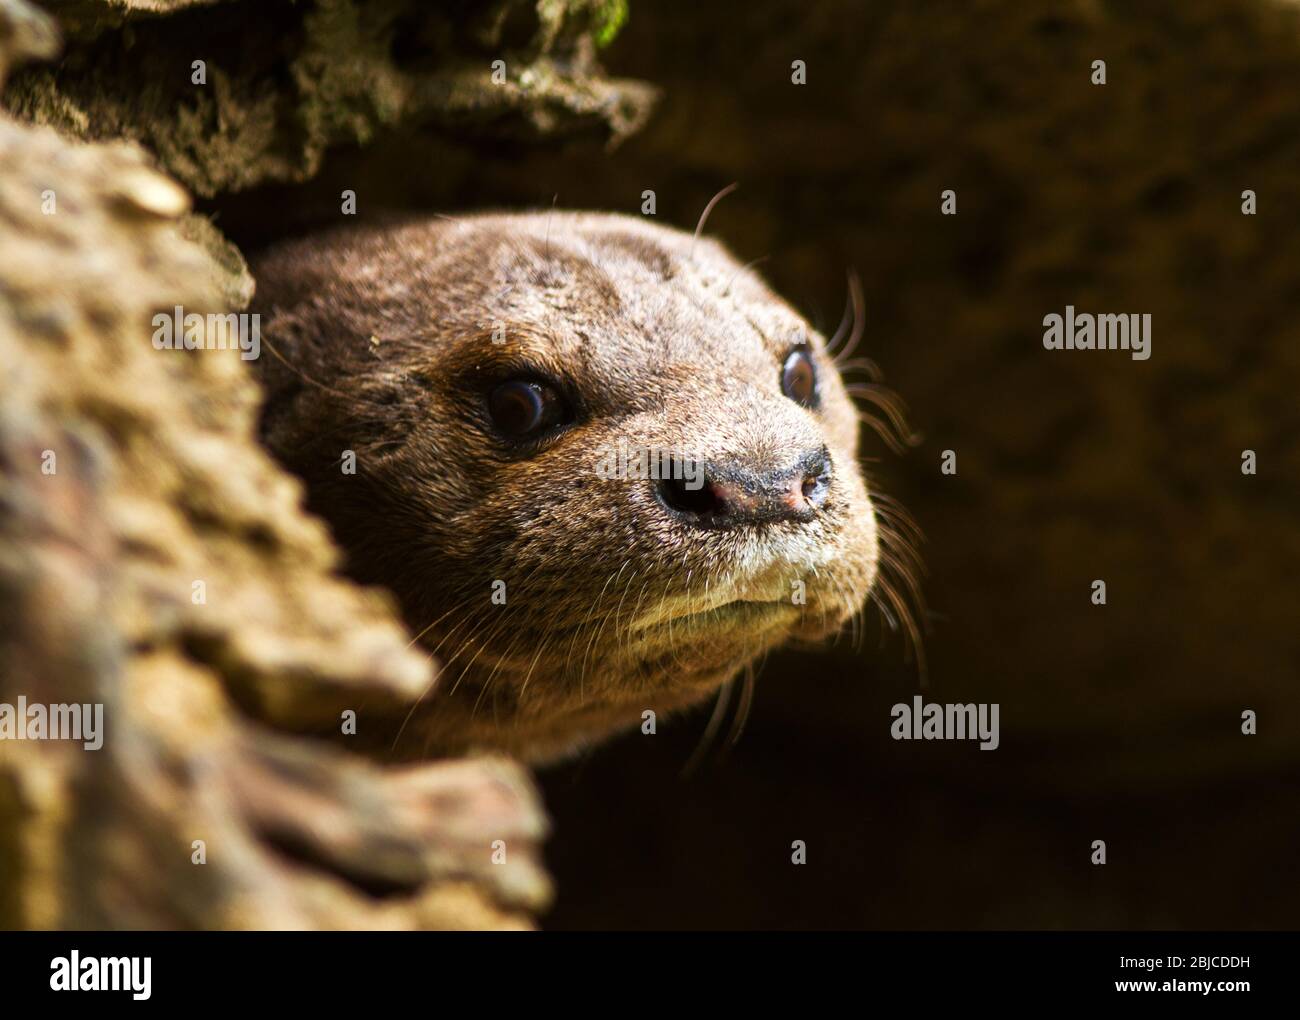 A Spotted-necked Otter peers warily out from the entrance to hit's den or holt. These small otters are specialised fish eaters and depend on clear fre Stock Photo